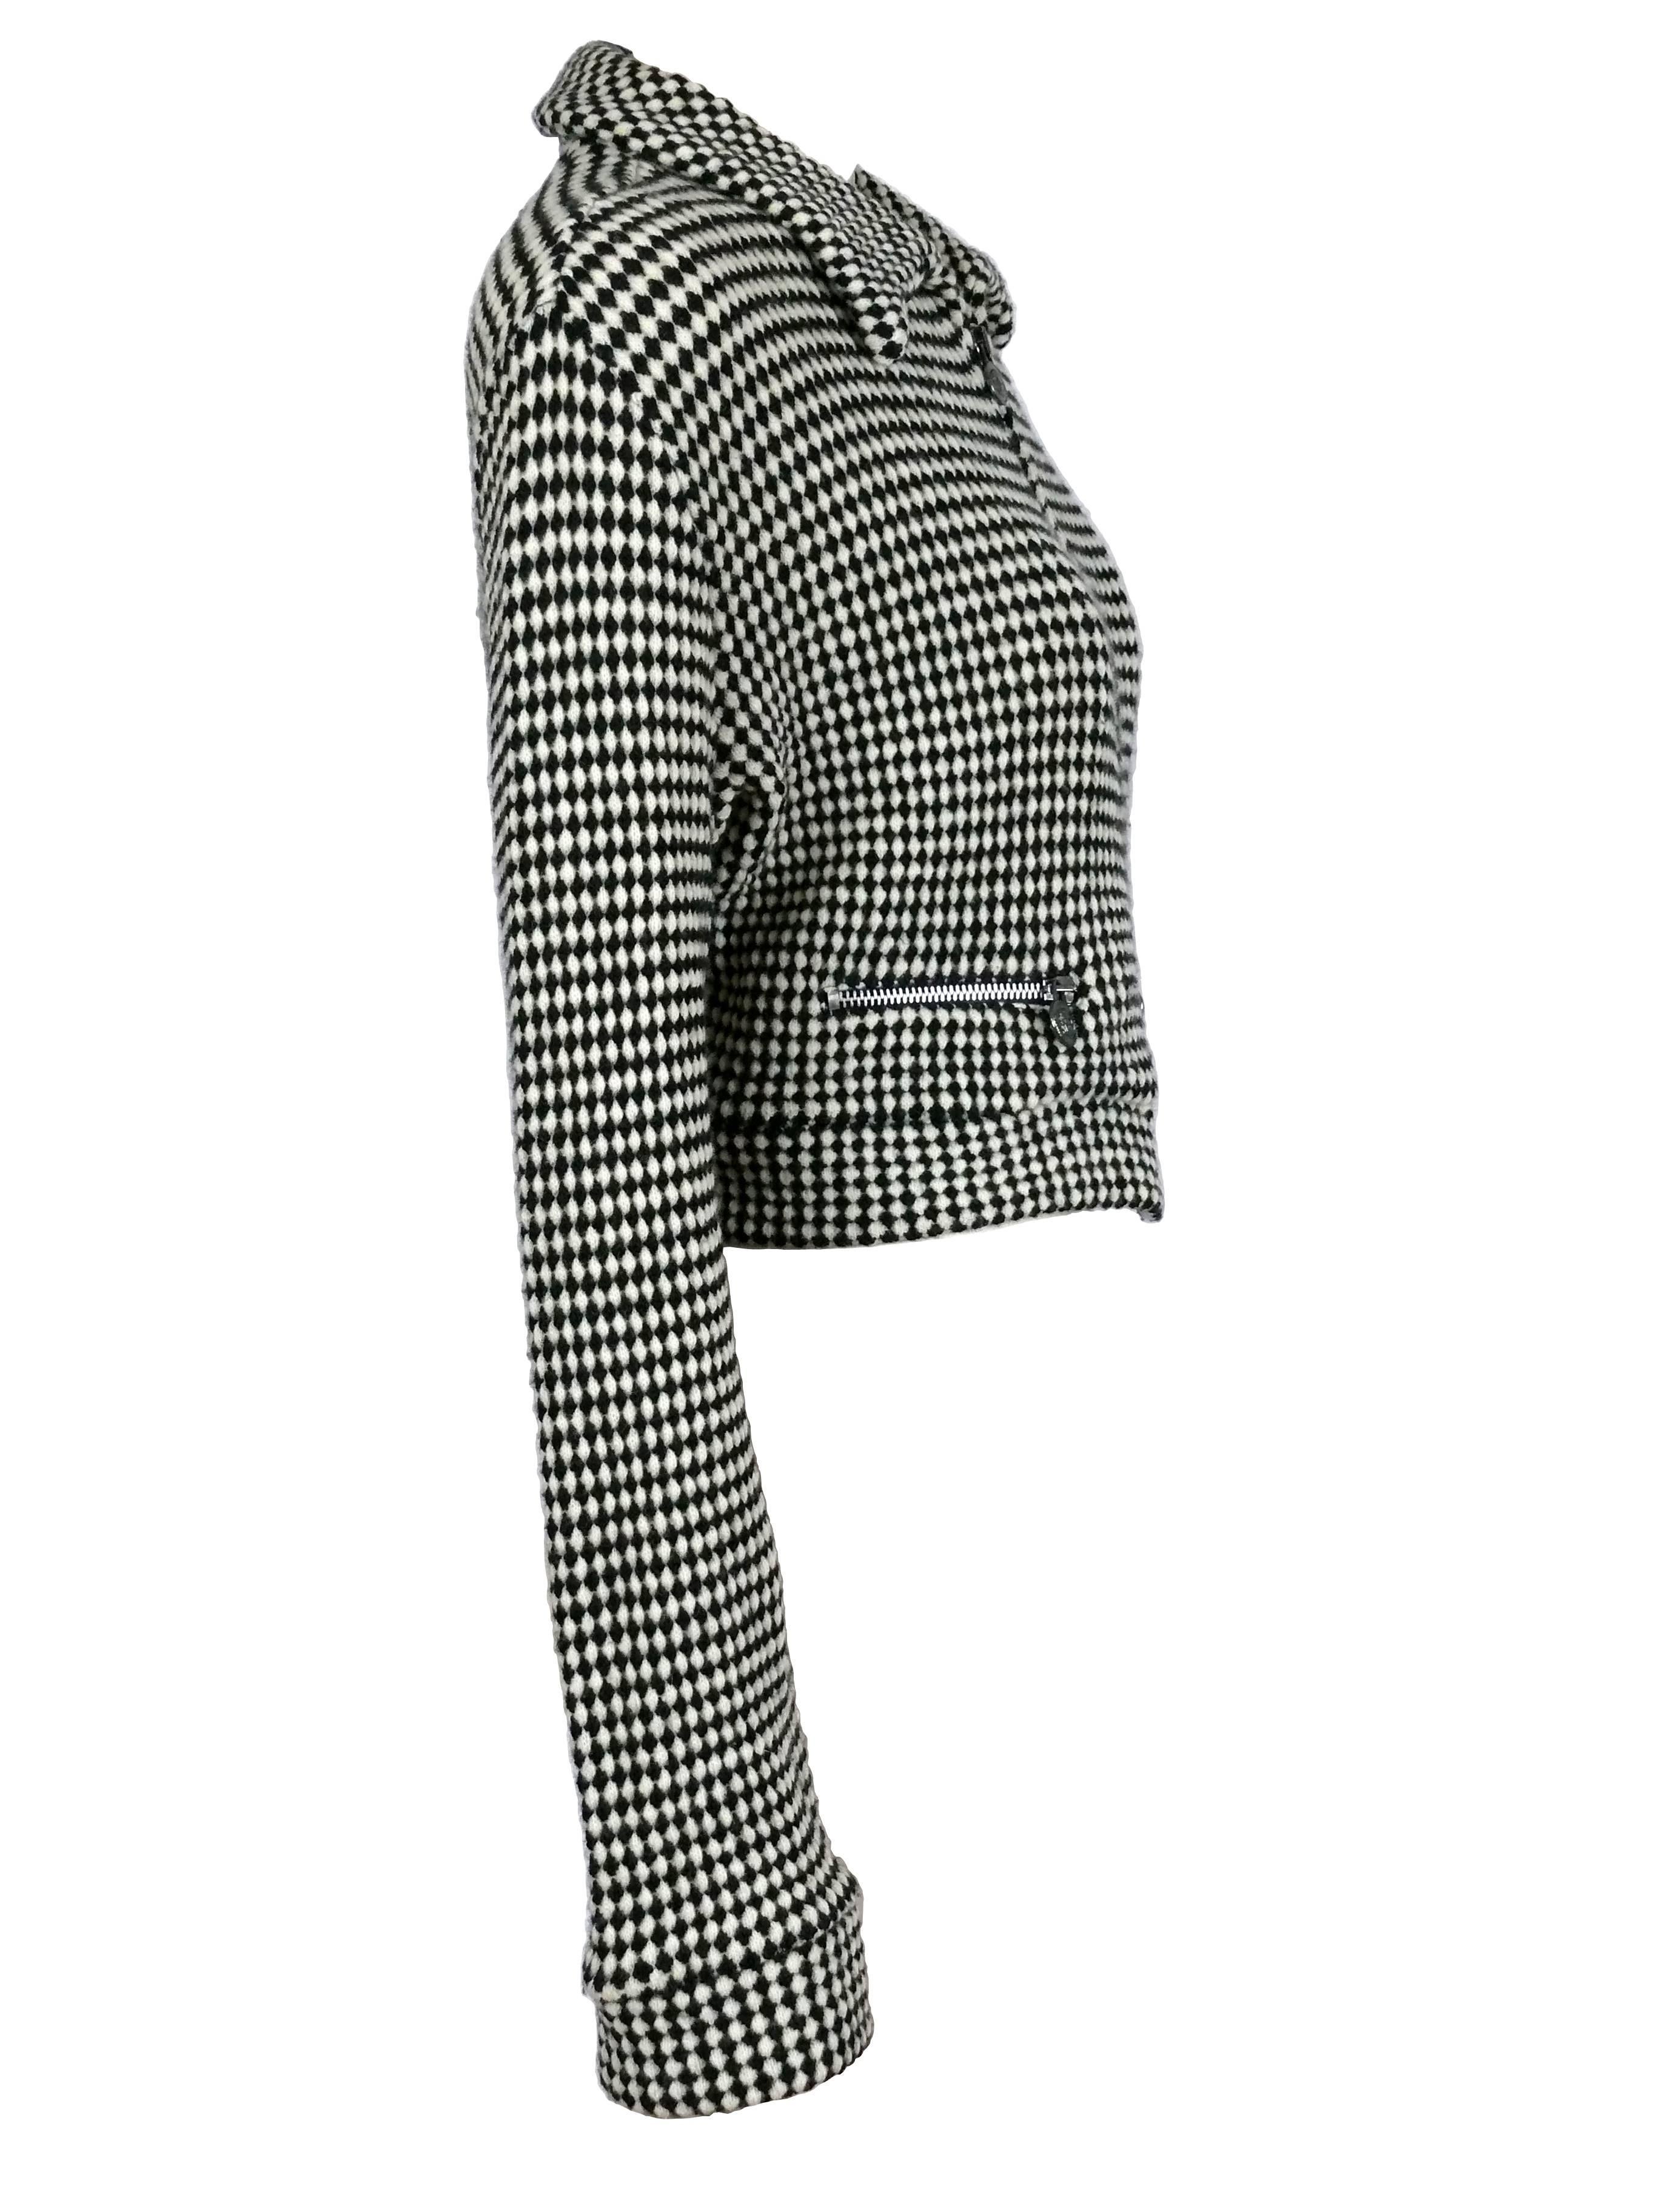 GIANNI VERSACE Jeans Couture vintage blended wool black and white checkered vest jacket.

Zip up front.
Medusa head zip buttons.
Two front pockets.
Unlined.

Label reads Versace Jeans Couture.
Piece n° 796704.

Marked Size : L.
Please